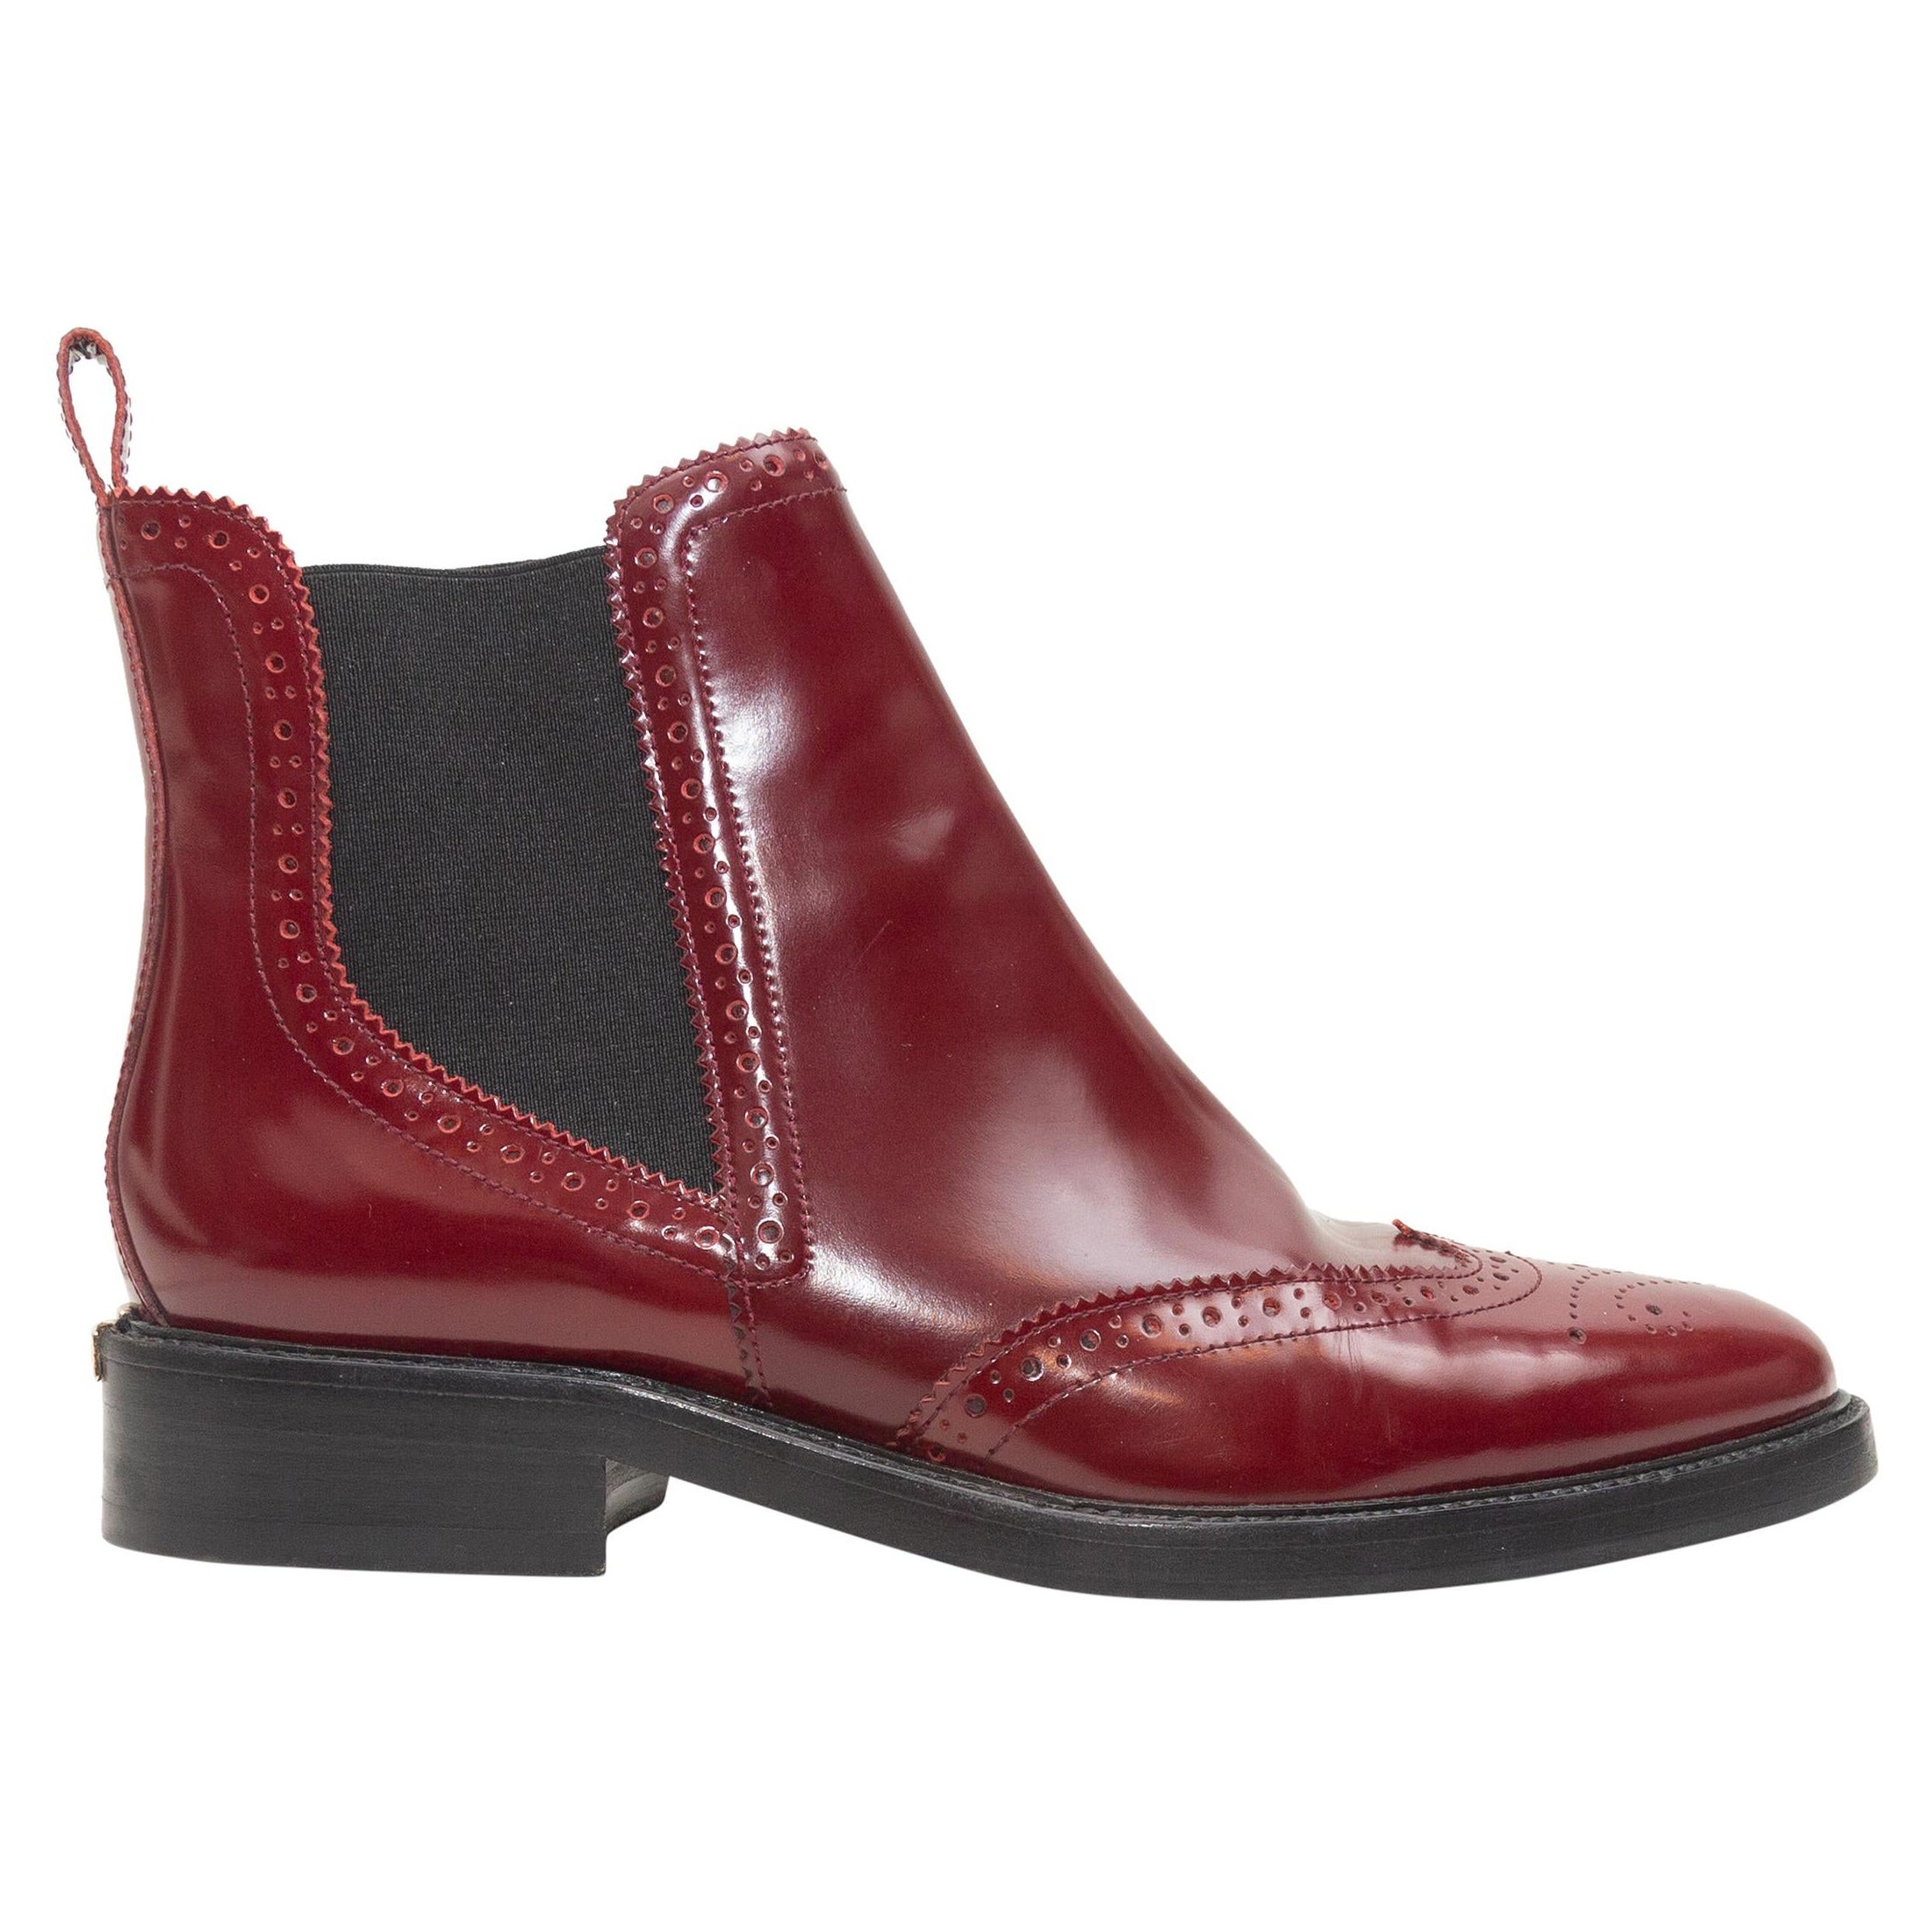 Burberry Brogue Maroon Ankle Boots